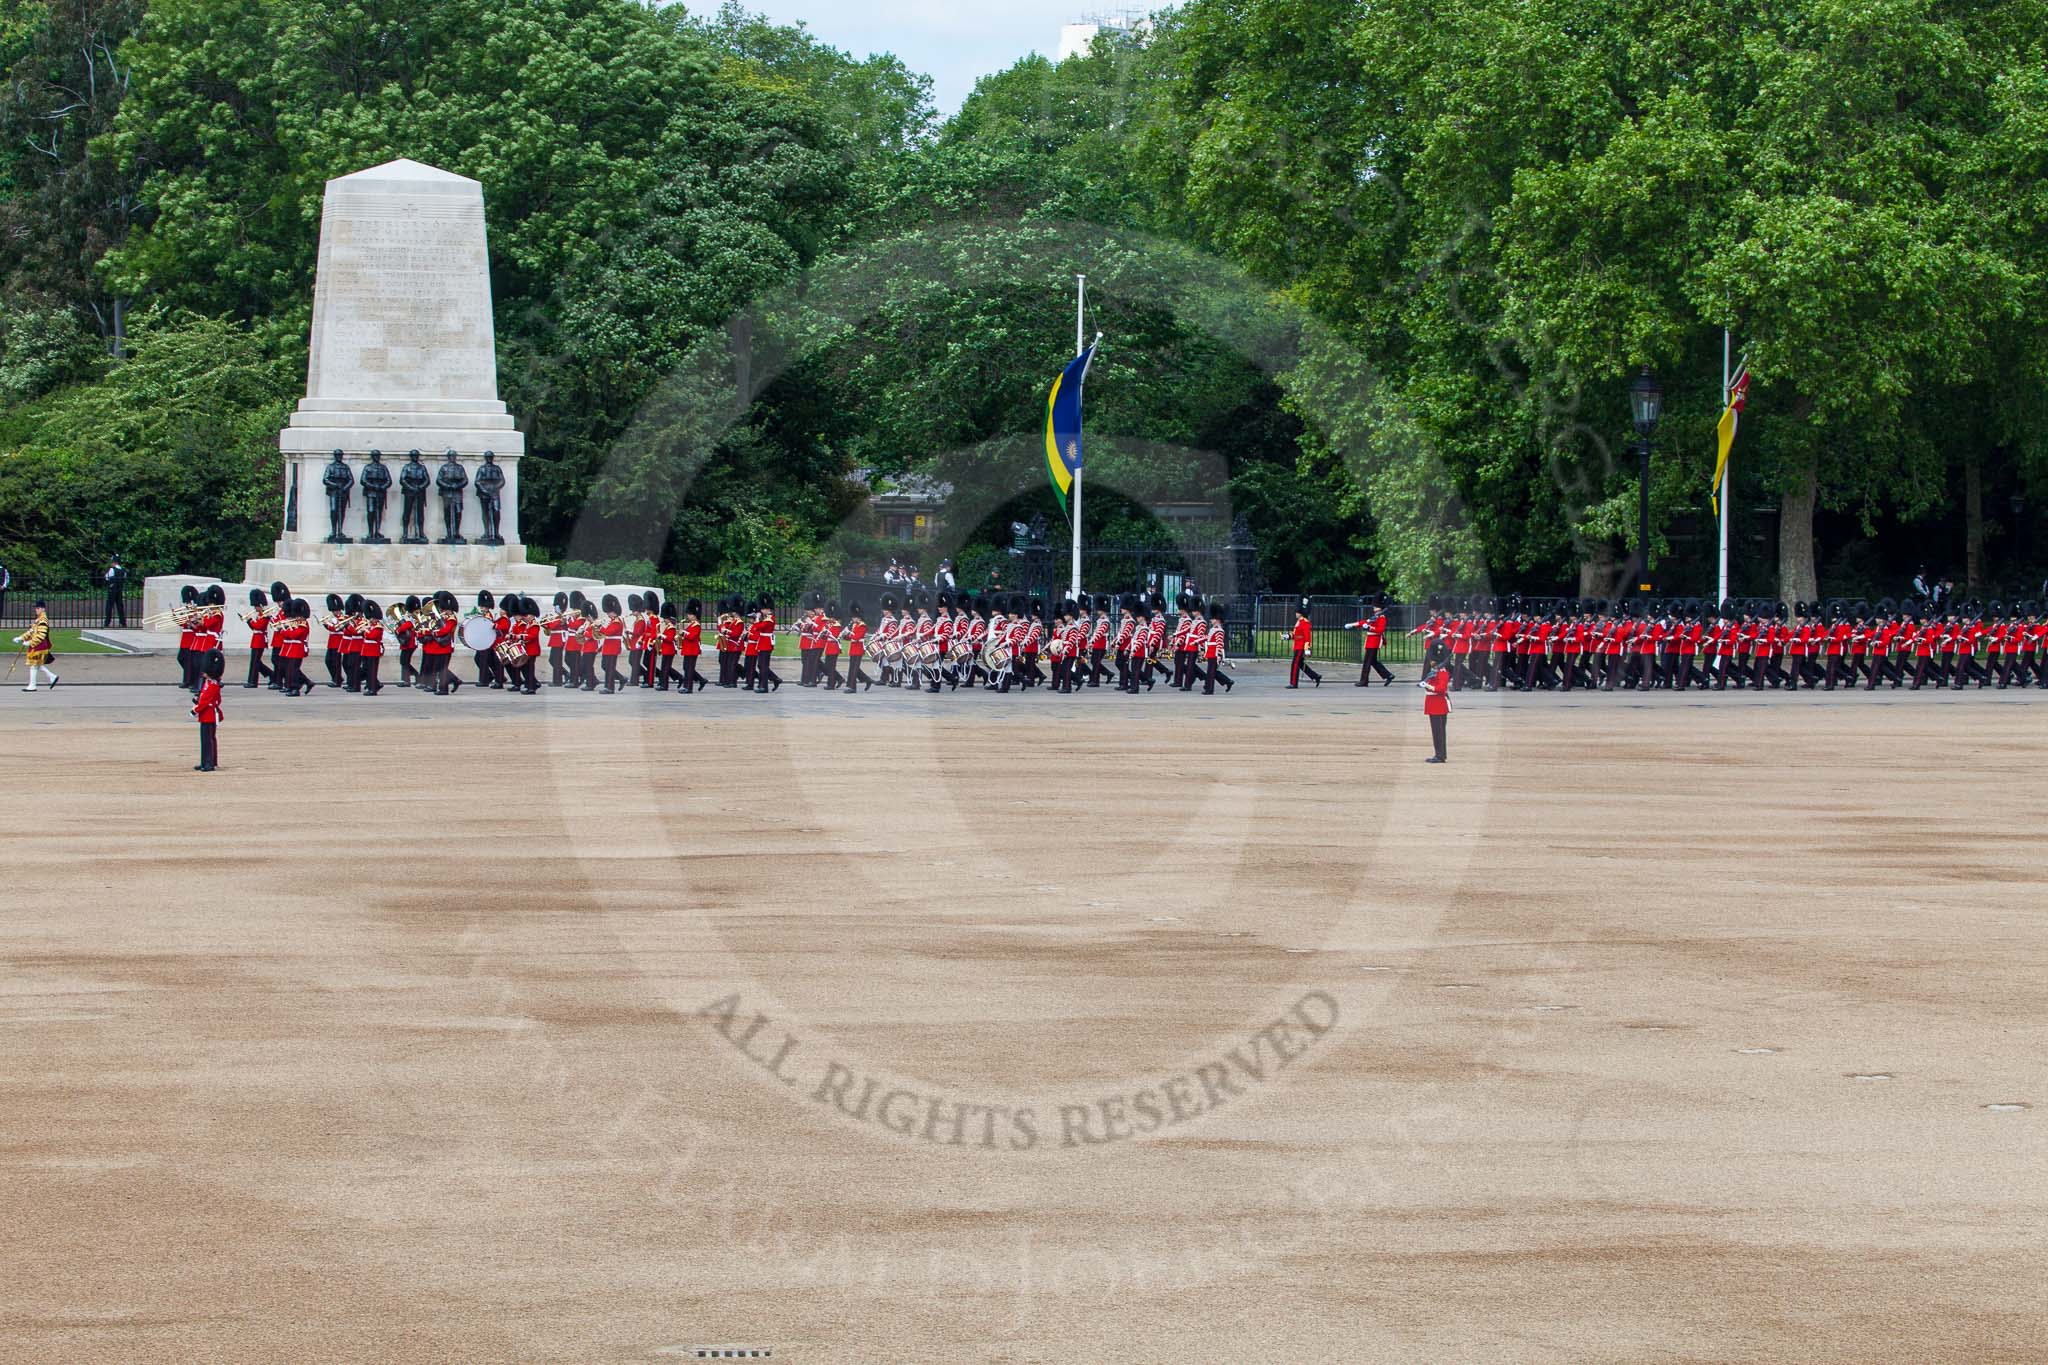 The Colonel's Review 2013.
Horse Guards Parade, Westminster,
London SW1,

United Kingdom,
on 08 June 2013 at 10:27, image #103